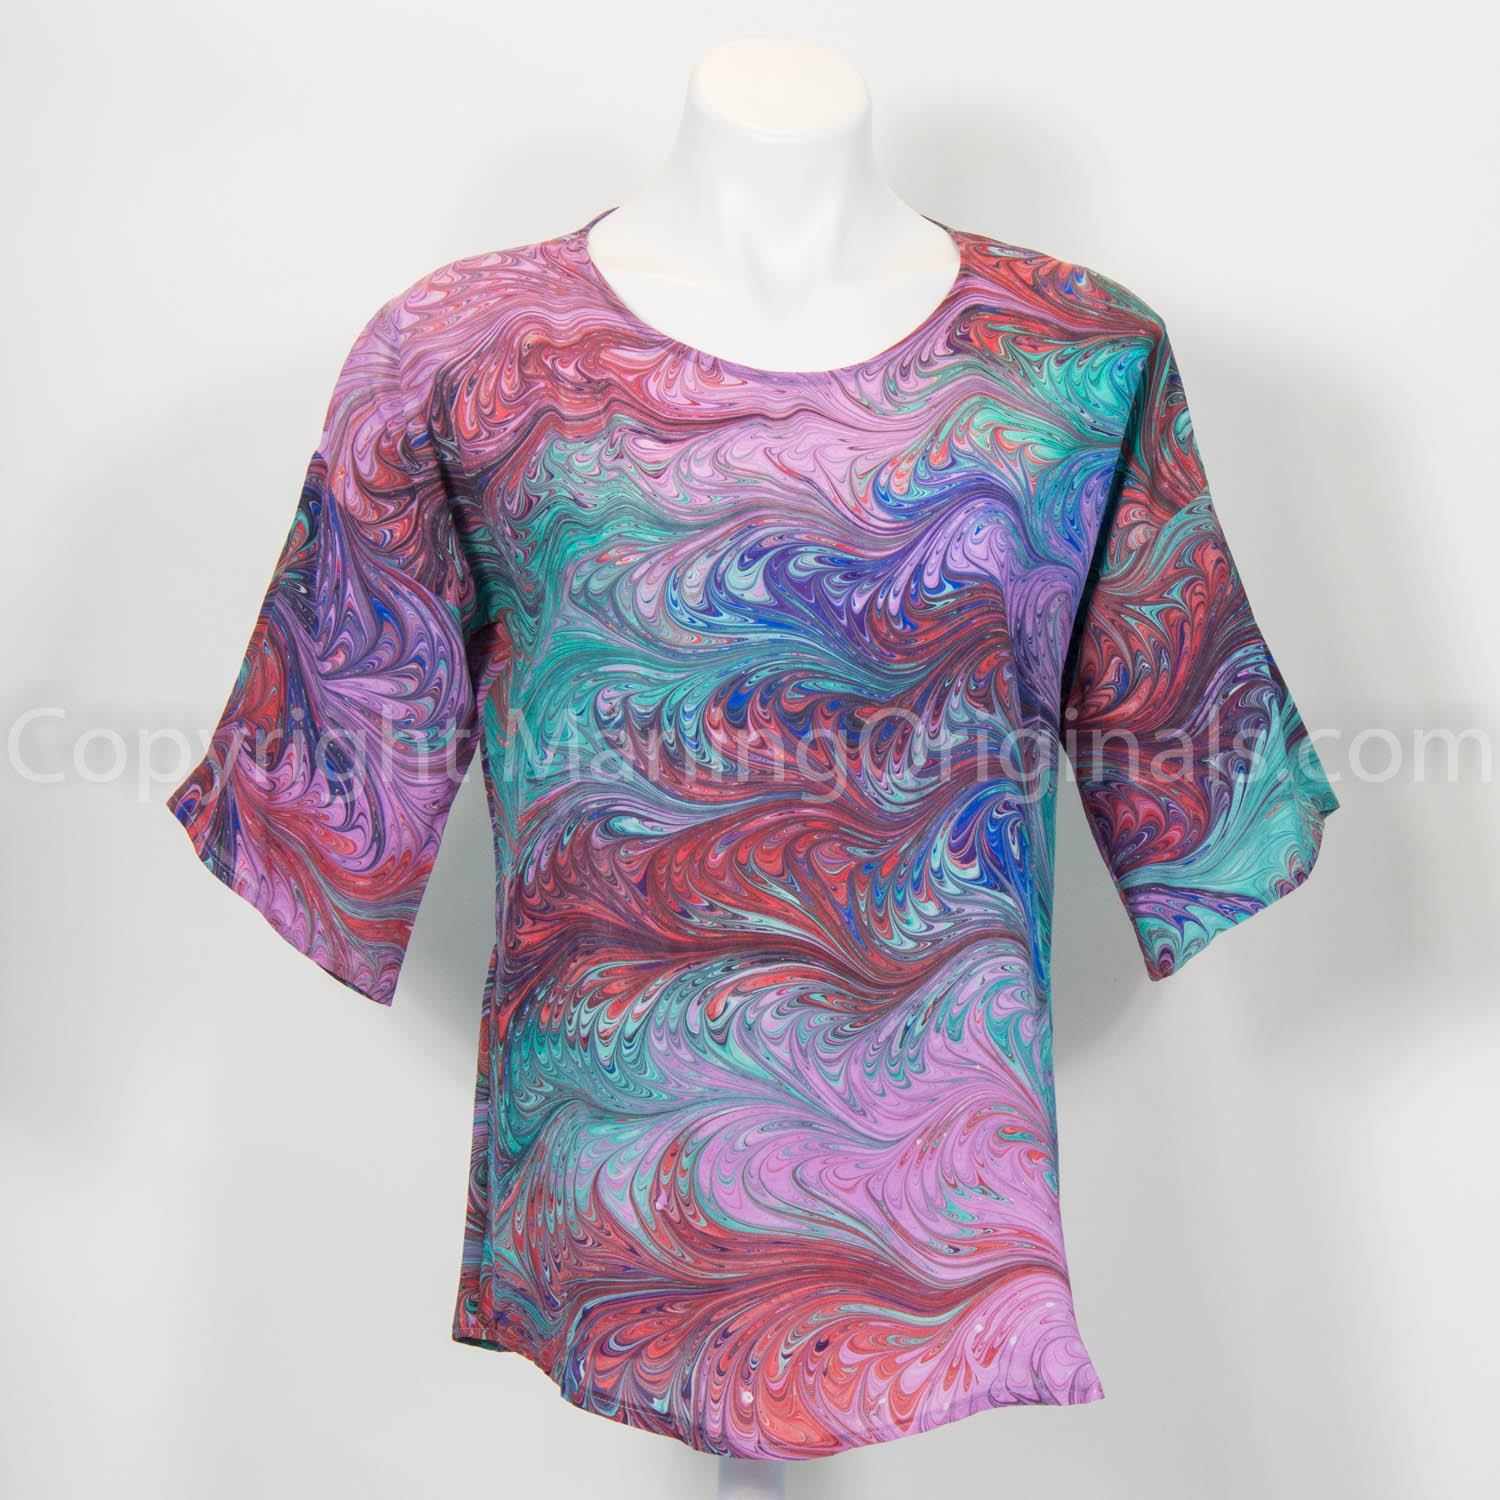 Hand marbled silk top with round neck, long sleeves, curved hemline. Unique marbled pattern.